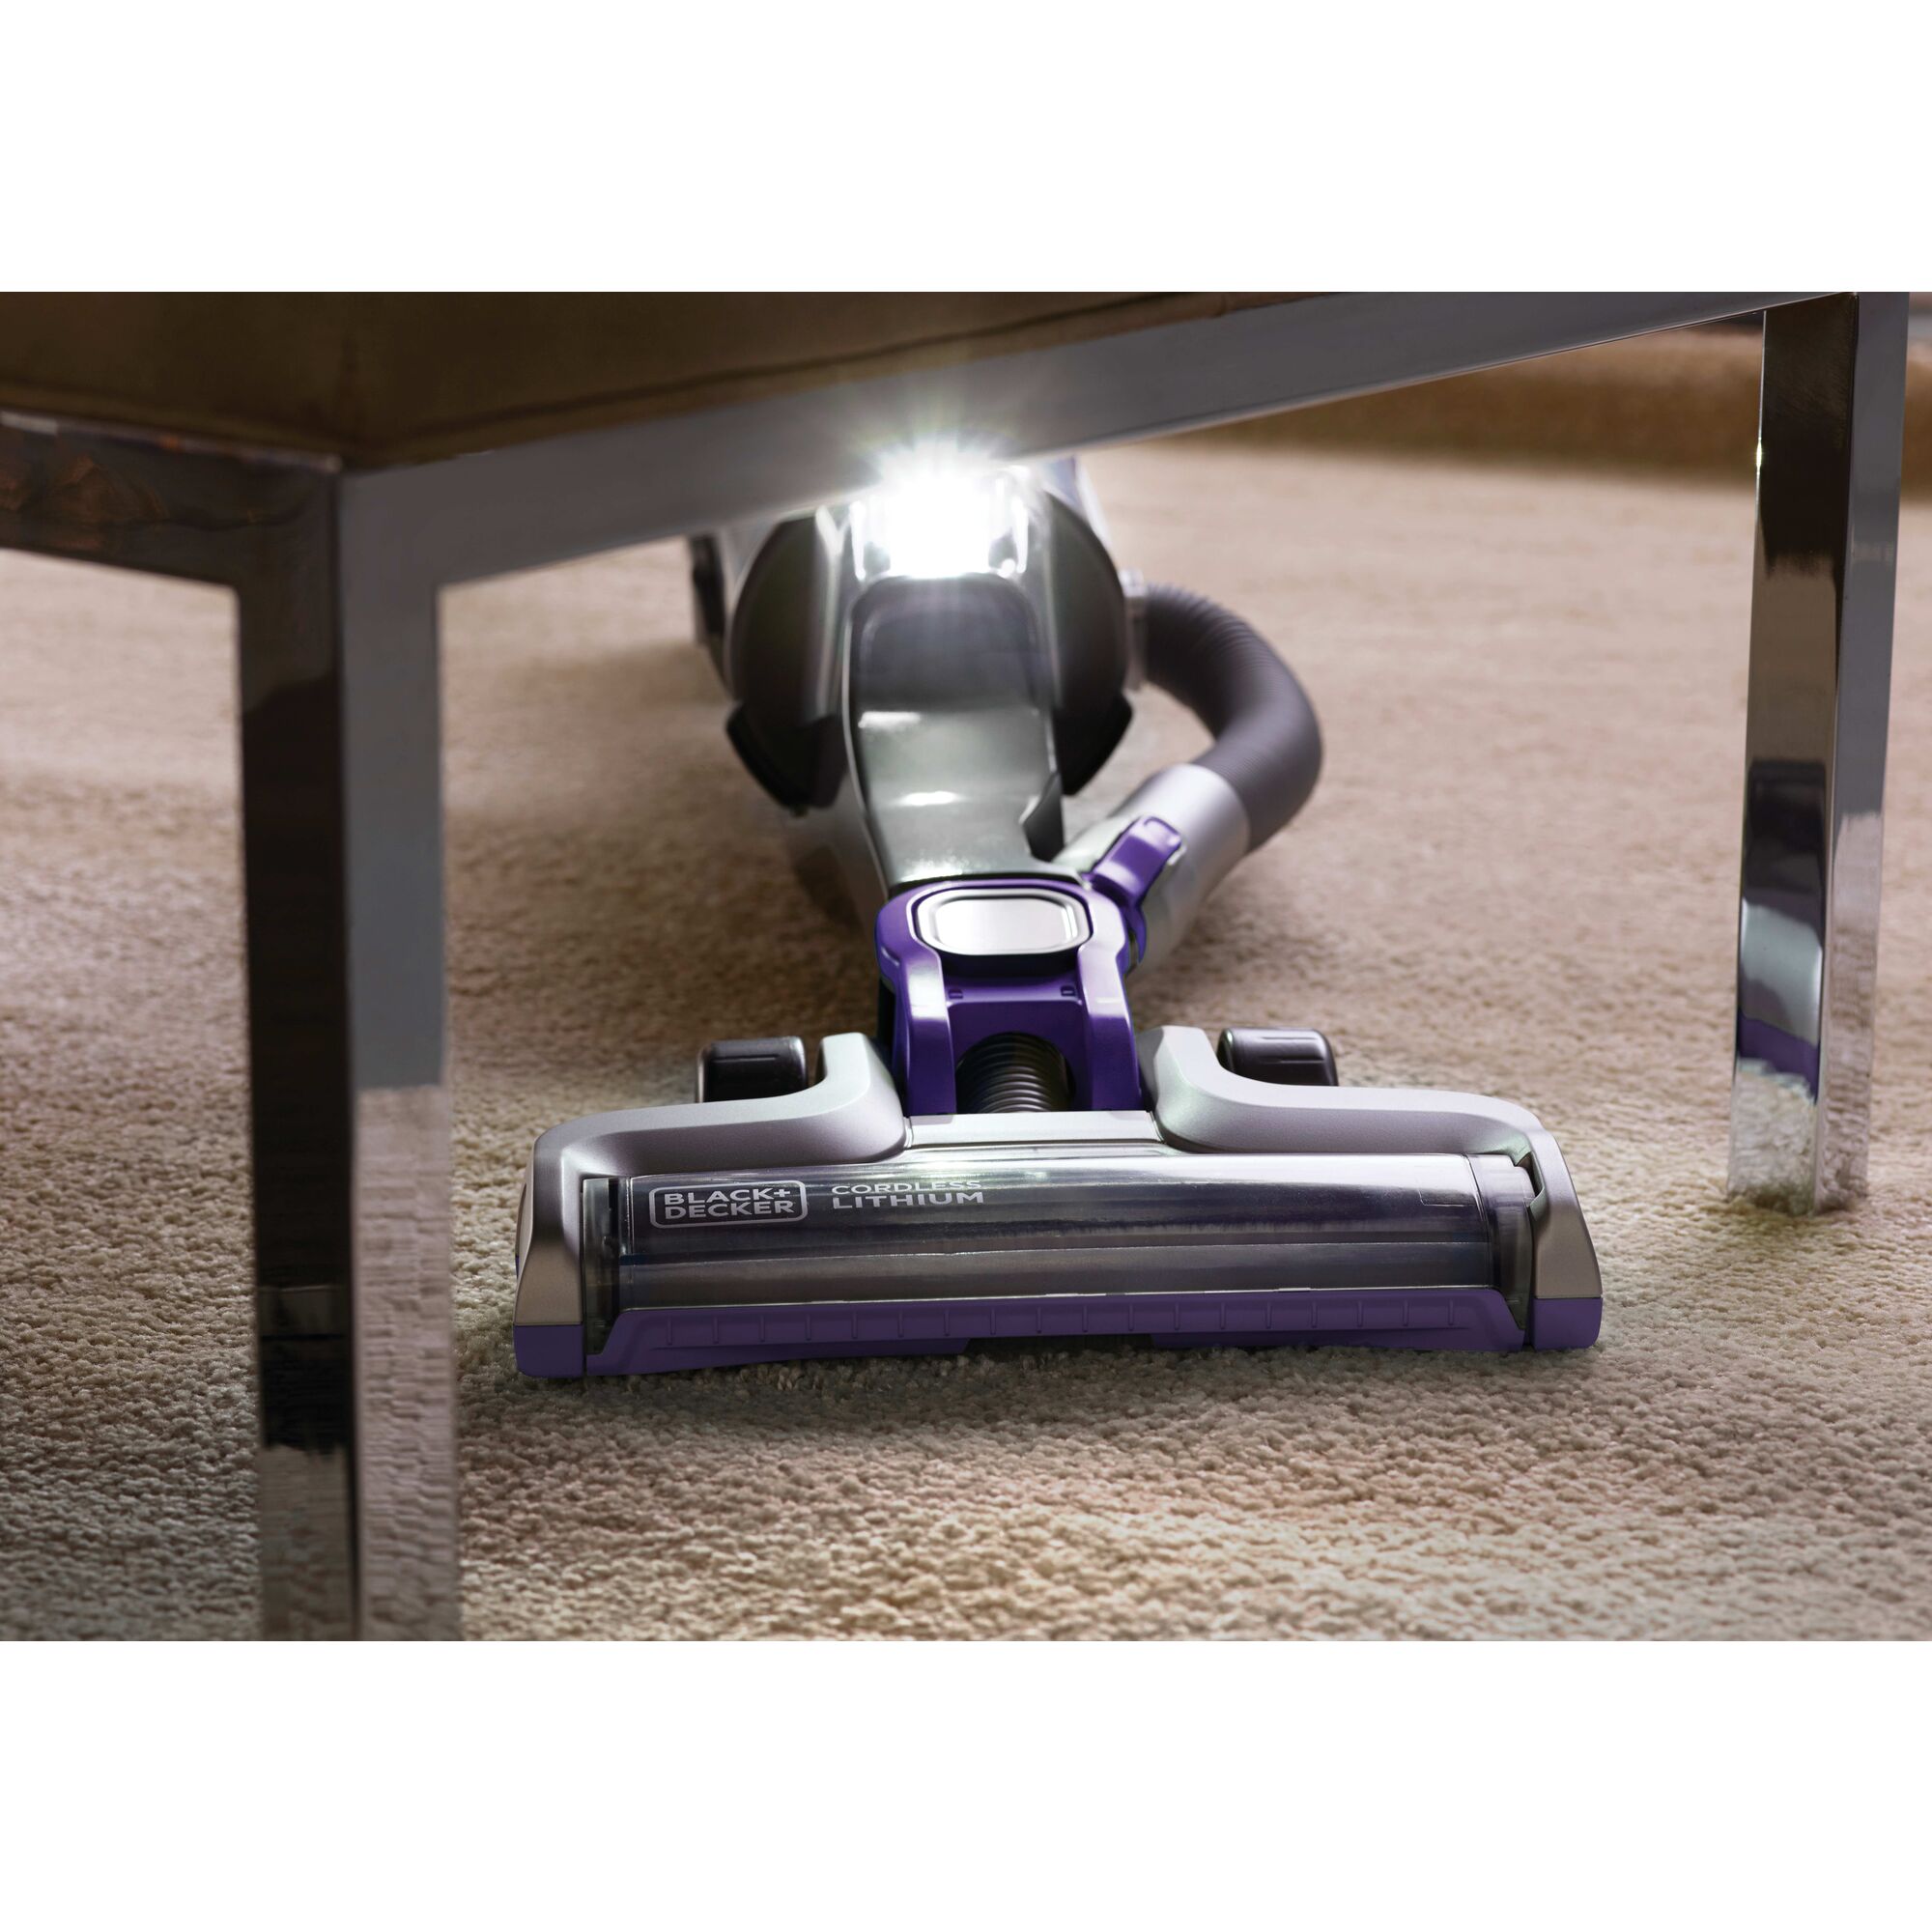 POWER SERIES PRO Cordless 2 in 1 Pet Vacuum being used for cleaning carpet under table with L E D turned on.